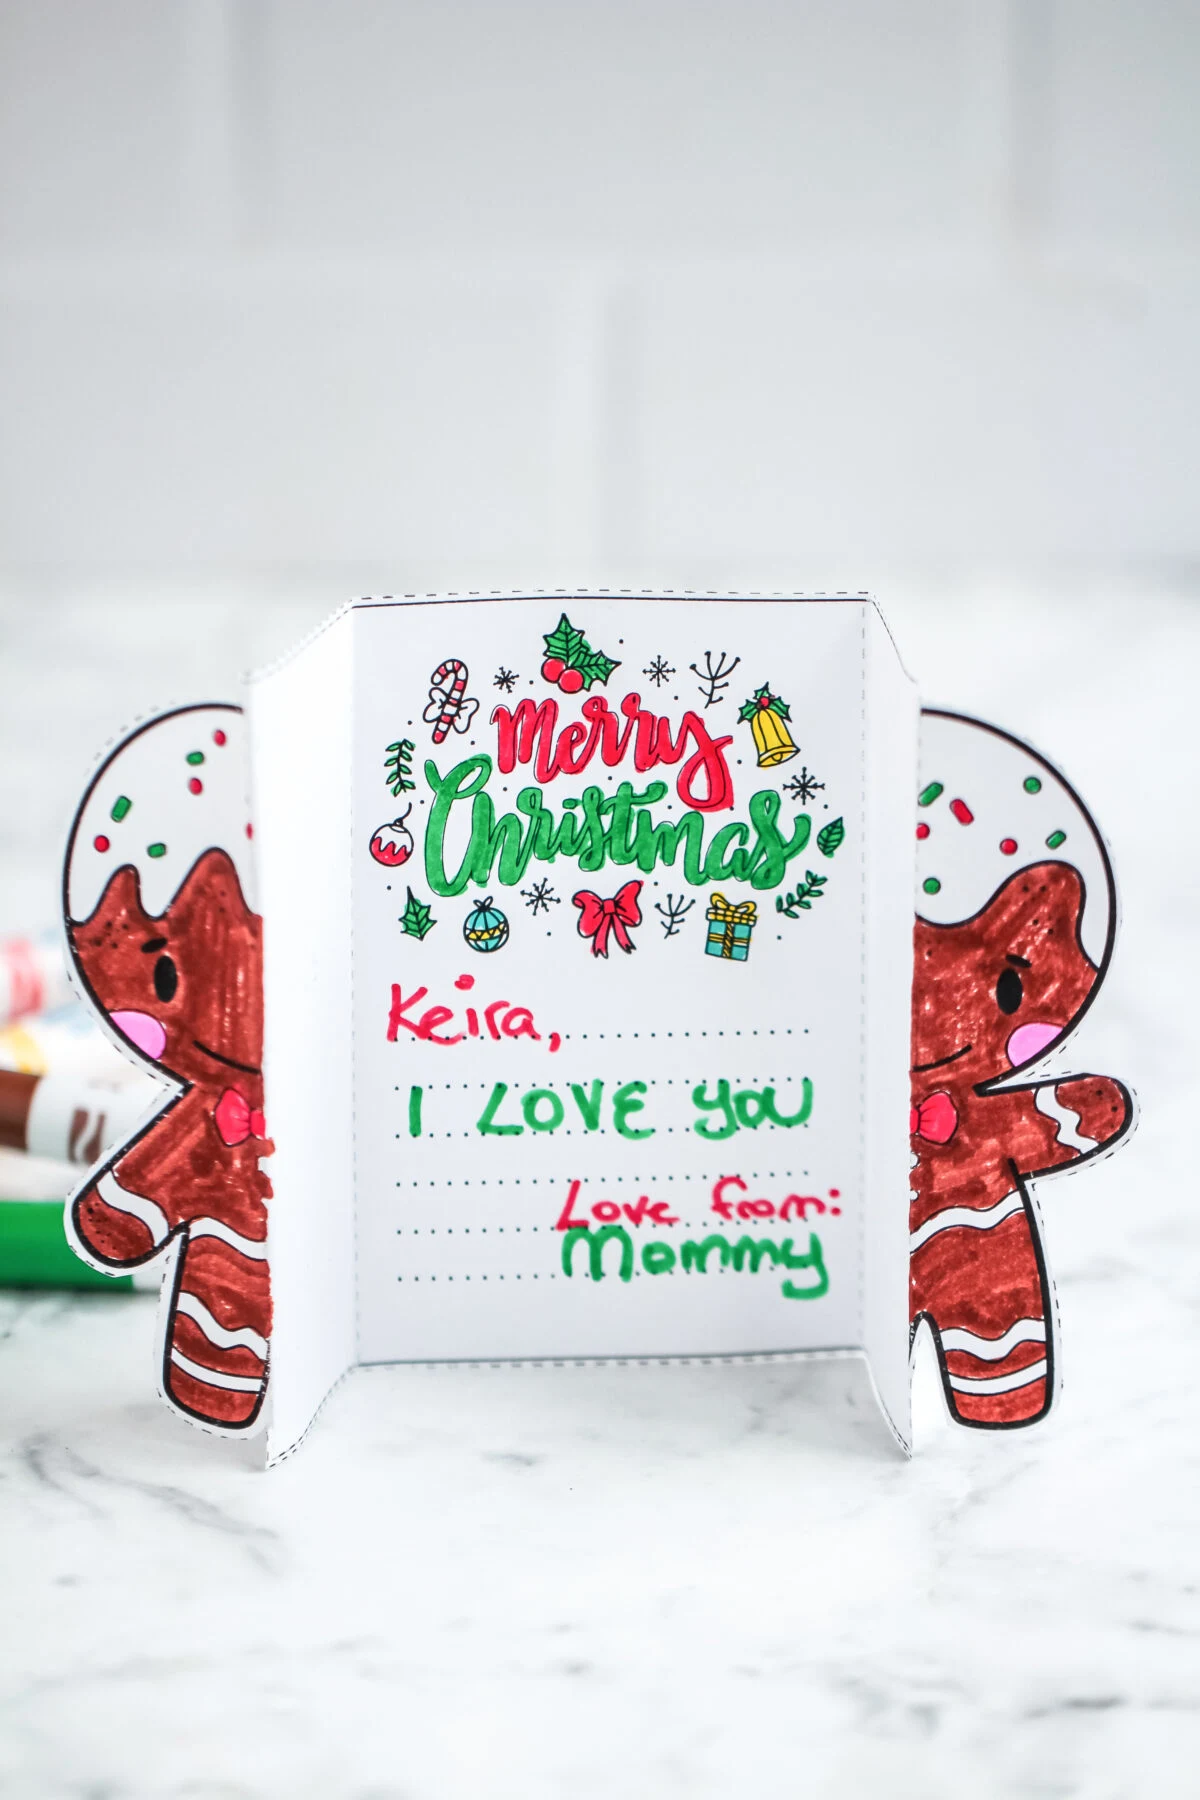 Looking for a fun and easy printable for your kids this holiday season? Check out these free, foldable Christmas cards kids can colour!